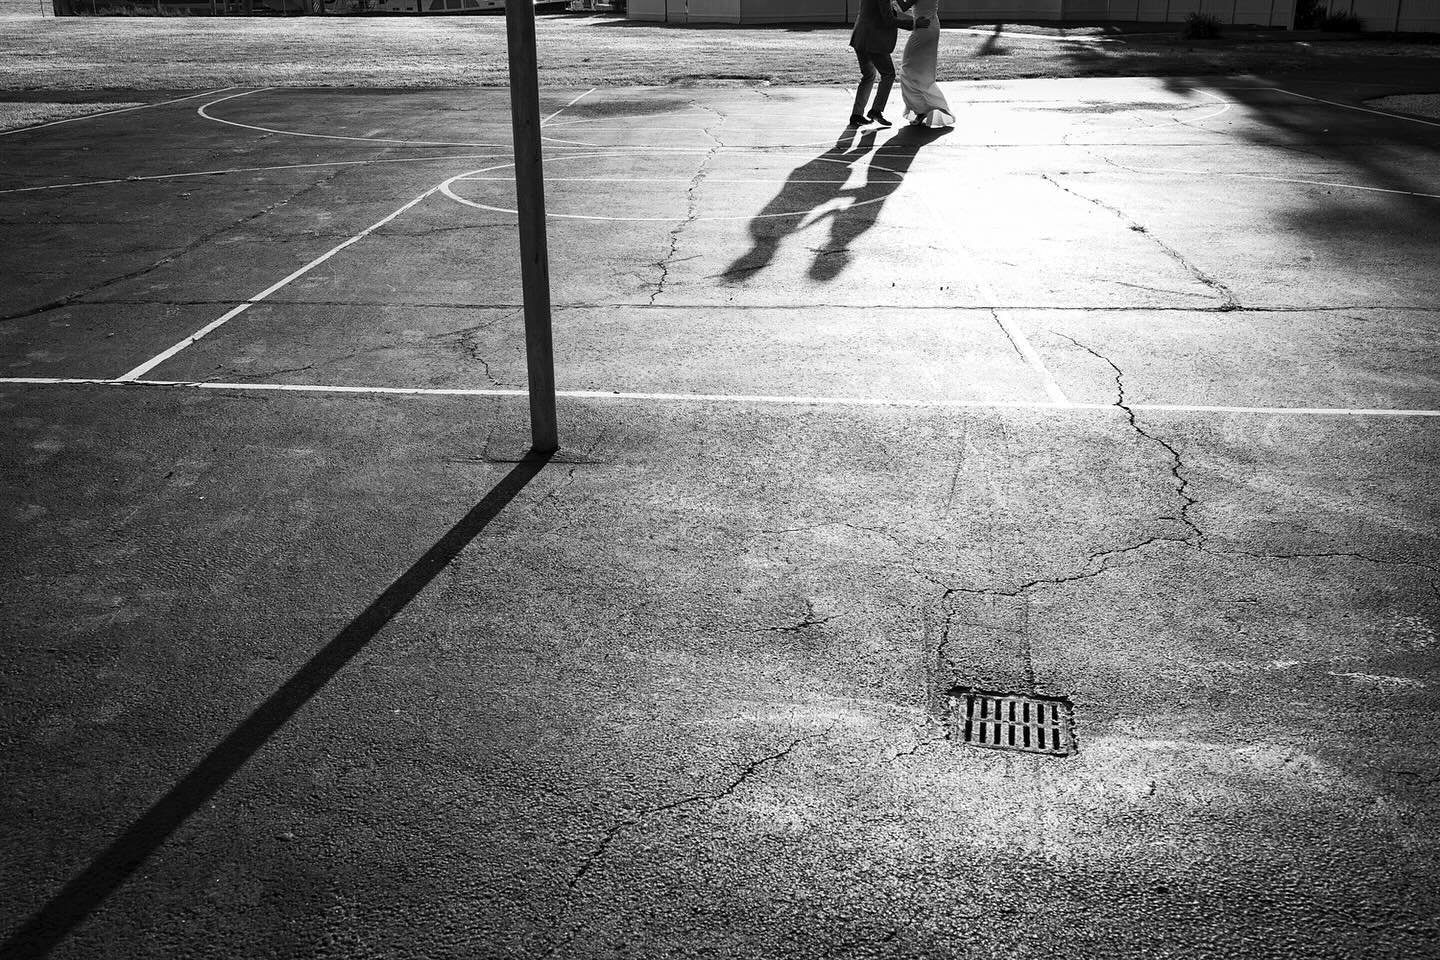 Shadow play as the couple practice their first dance on a basketball court away from their reception.